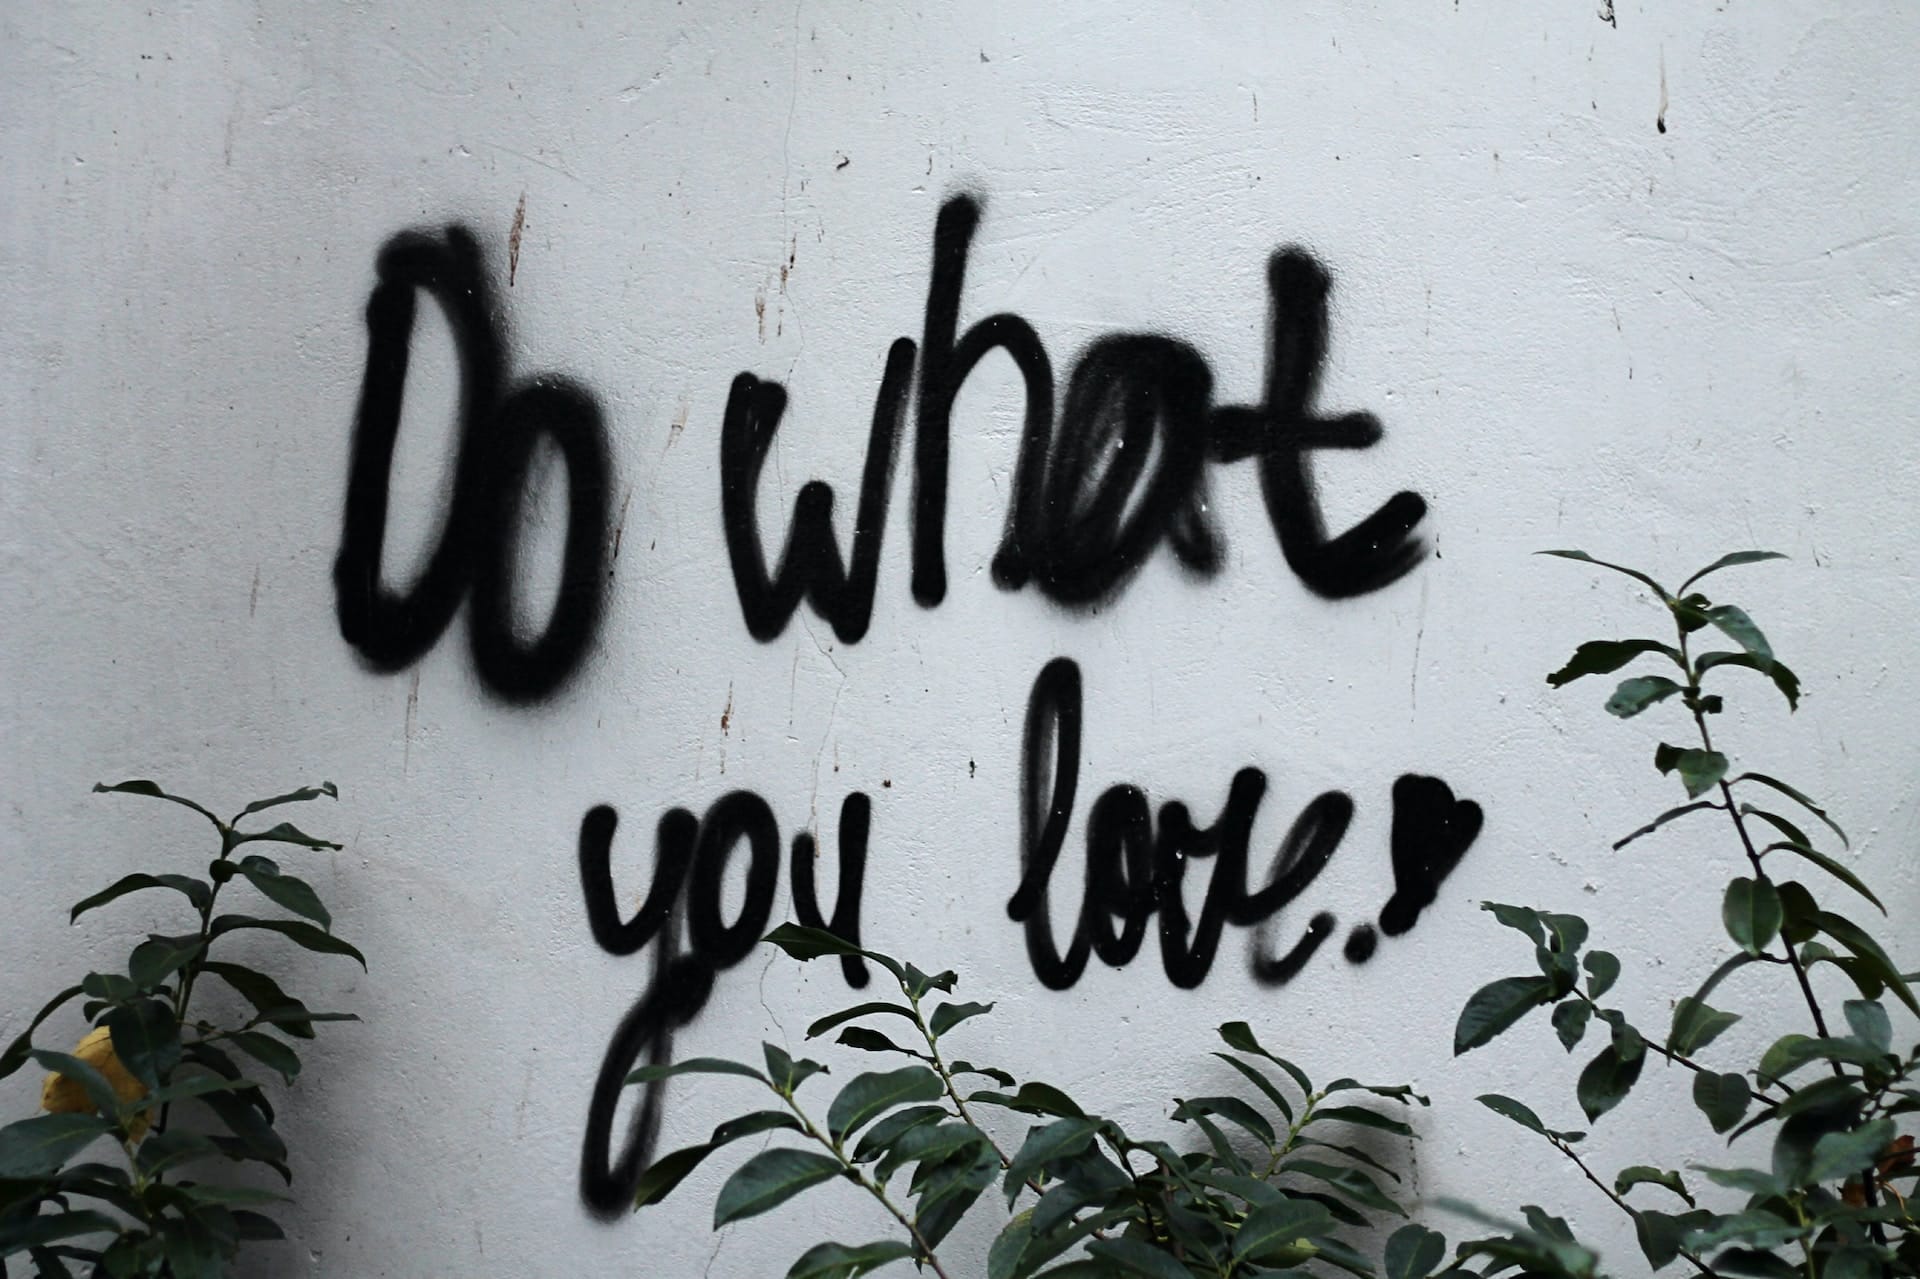 Graffiti on a wall in the Netherlands with the inspiring message 'Do what you love'. The street art embodies a spirit of freedom and passion, encouraging viewers to pursue their interests and connect with their inner creativity.